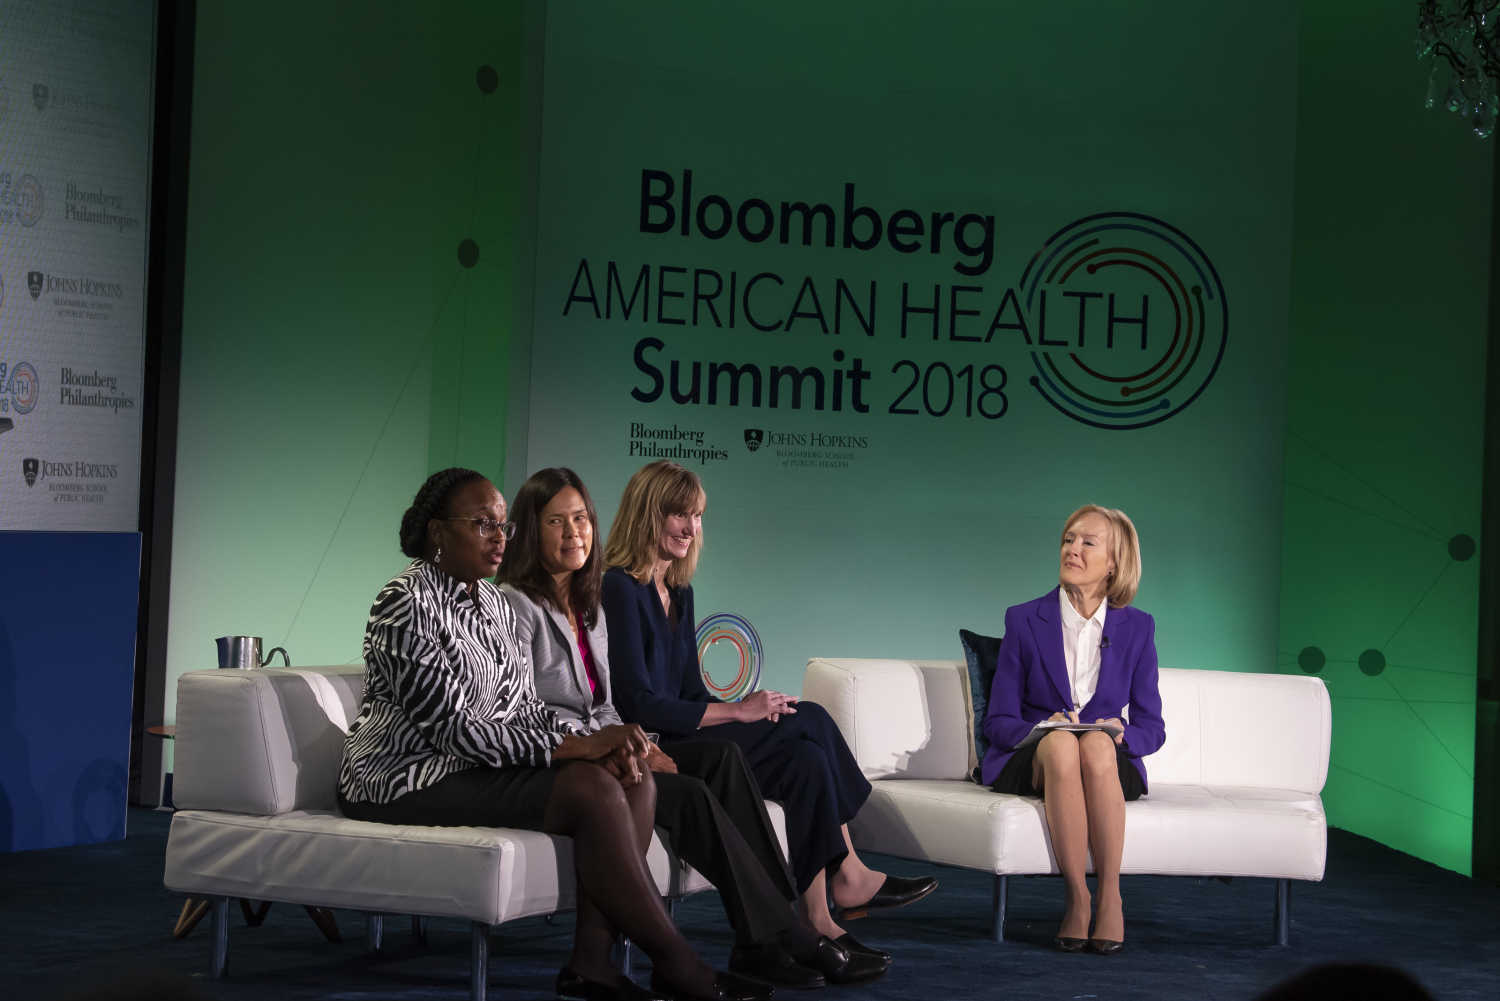 One of many events NDC's Executive Director Jen Goold has spoken at. Photo courtesy of Johns Hopkins Bloomberg School of Public Health.